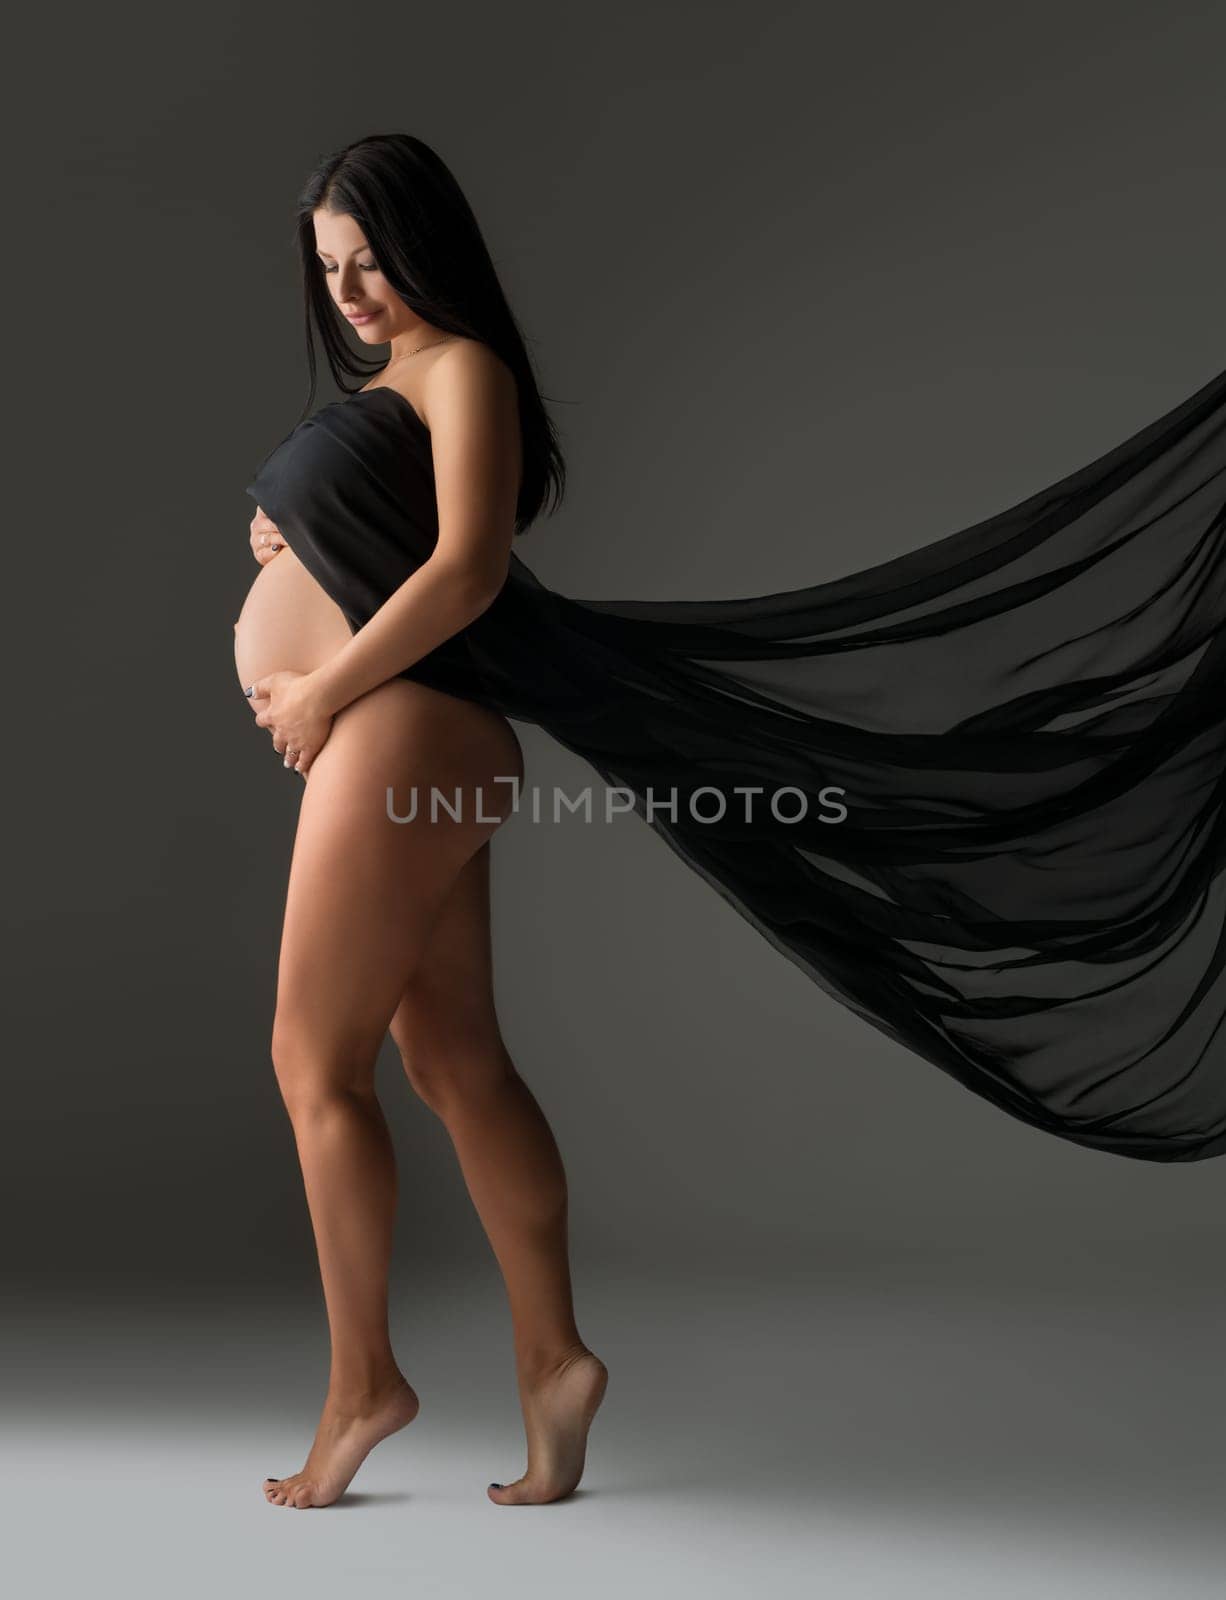 Elegant pregnant woman posing nude with flying cloth